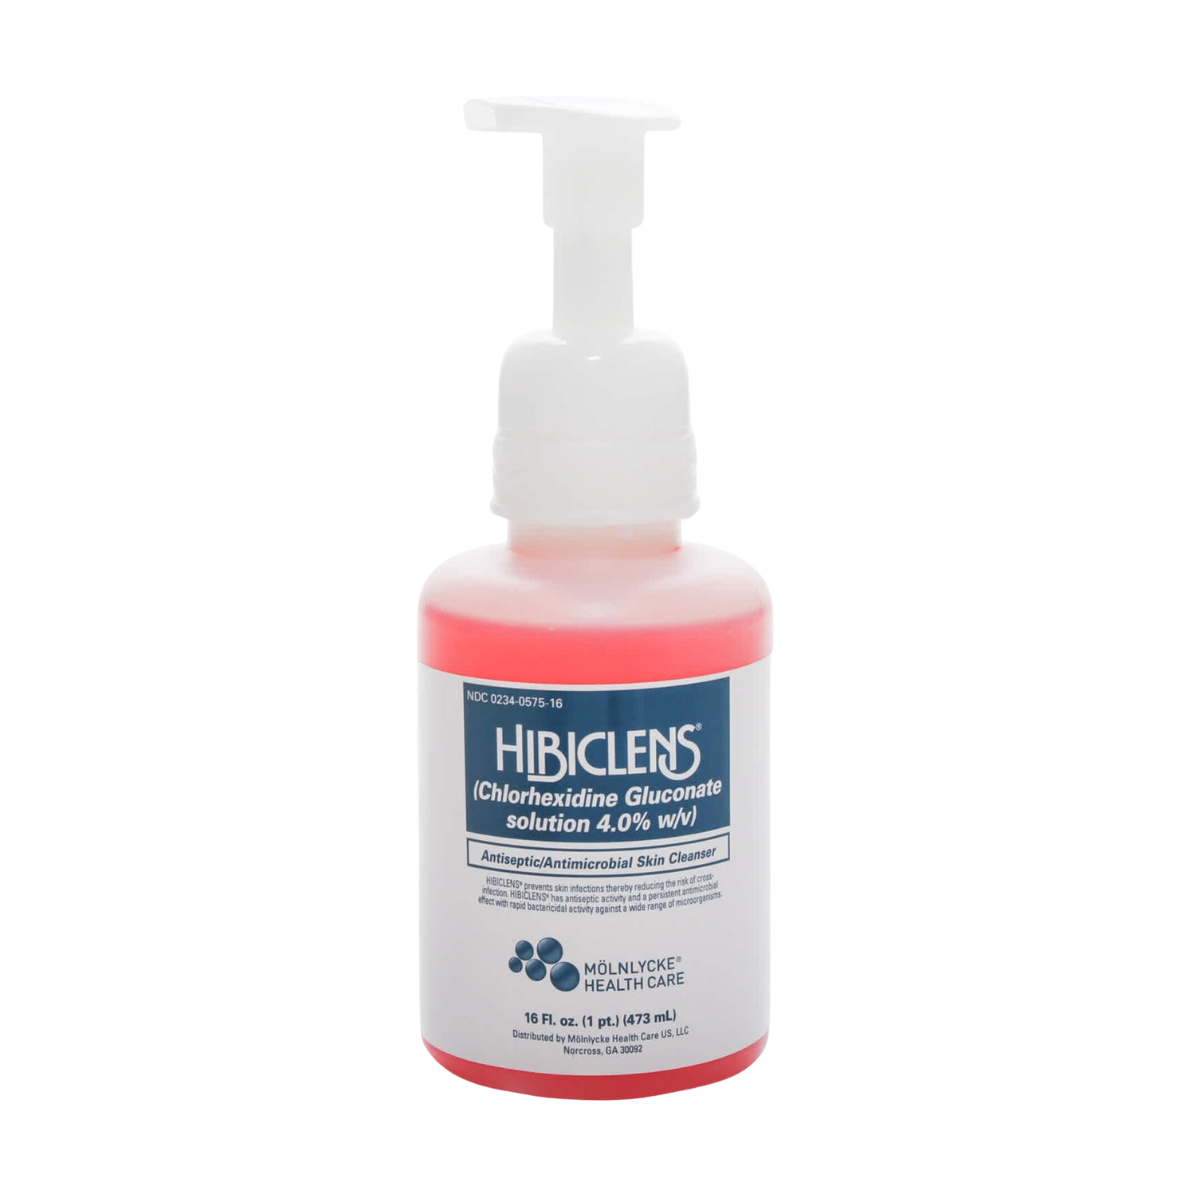 Hibiclens® Antiseptic / Antimicrobial Skin Cleanser